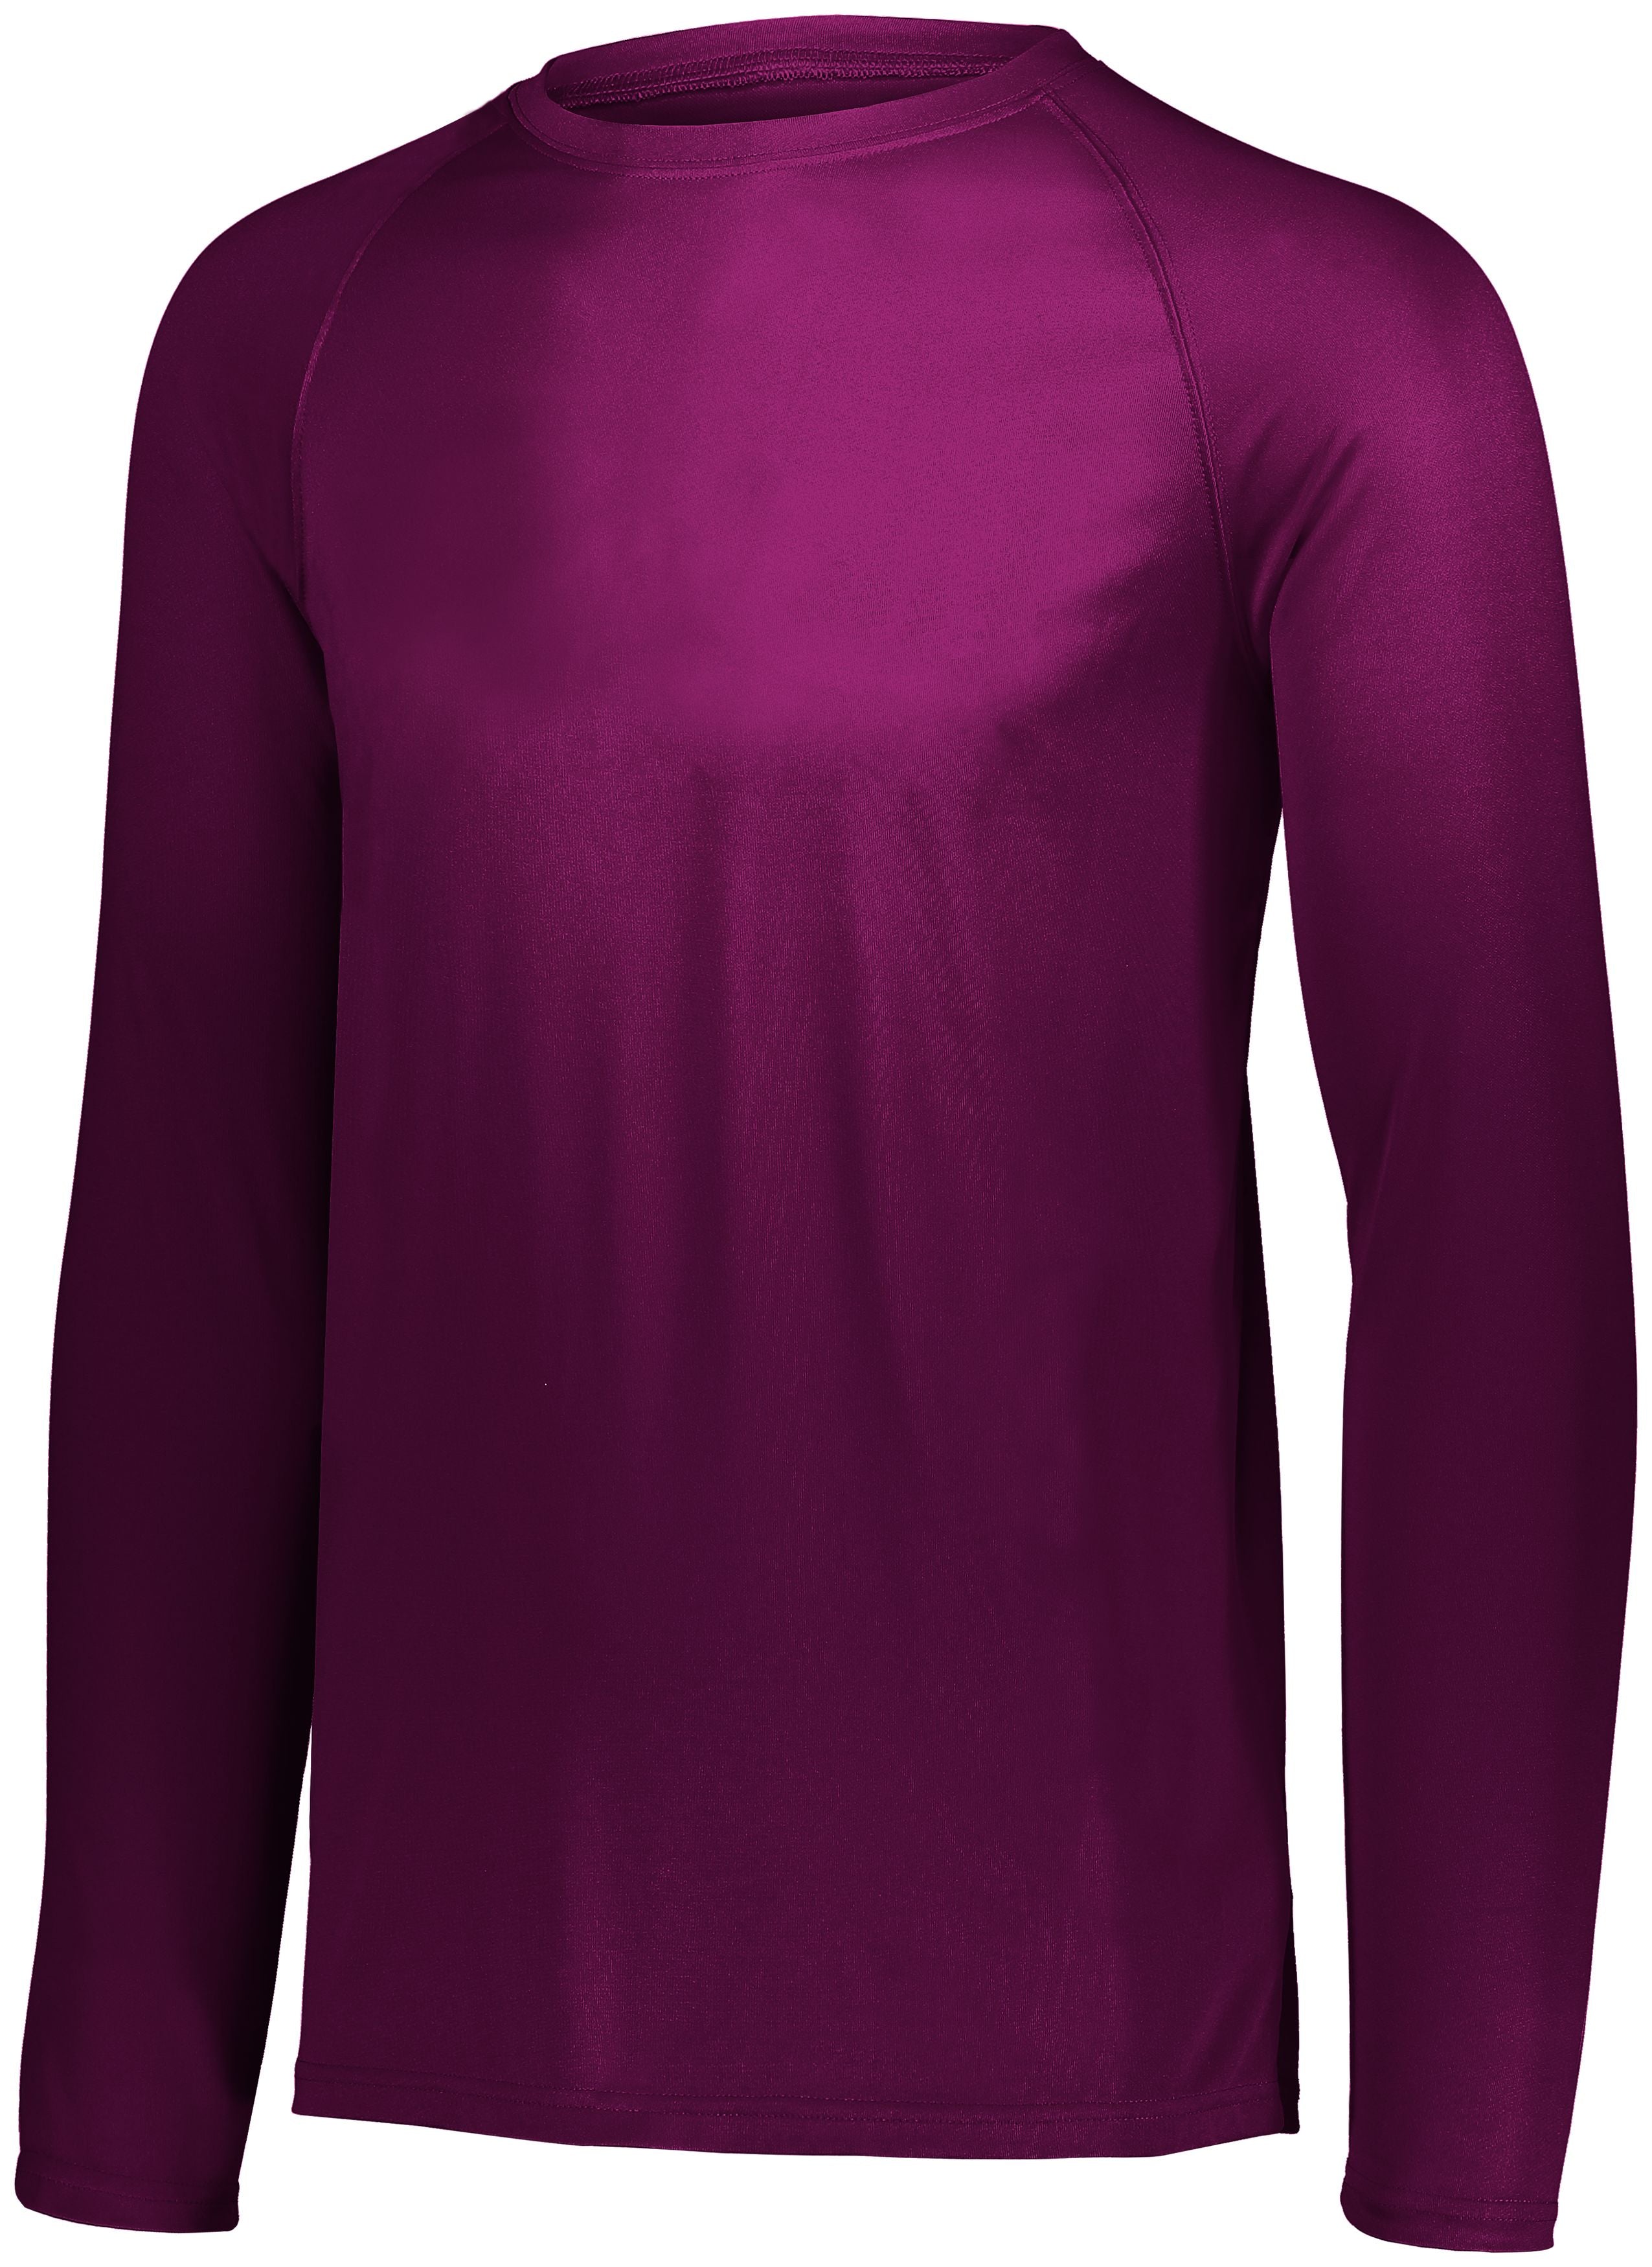 Augusta Sportswear Youth Attain Wicking Long Sleeve Tee in Maroon (Hlw)  -Part of the Youth, Youth-Tee-Shirt, T-Shirts, Augusta-Products, Shirts product lines at KanaleyCreations.com